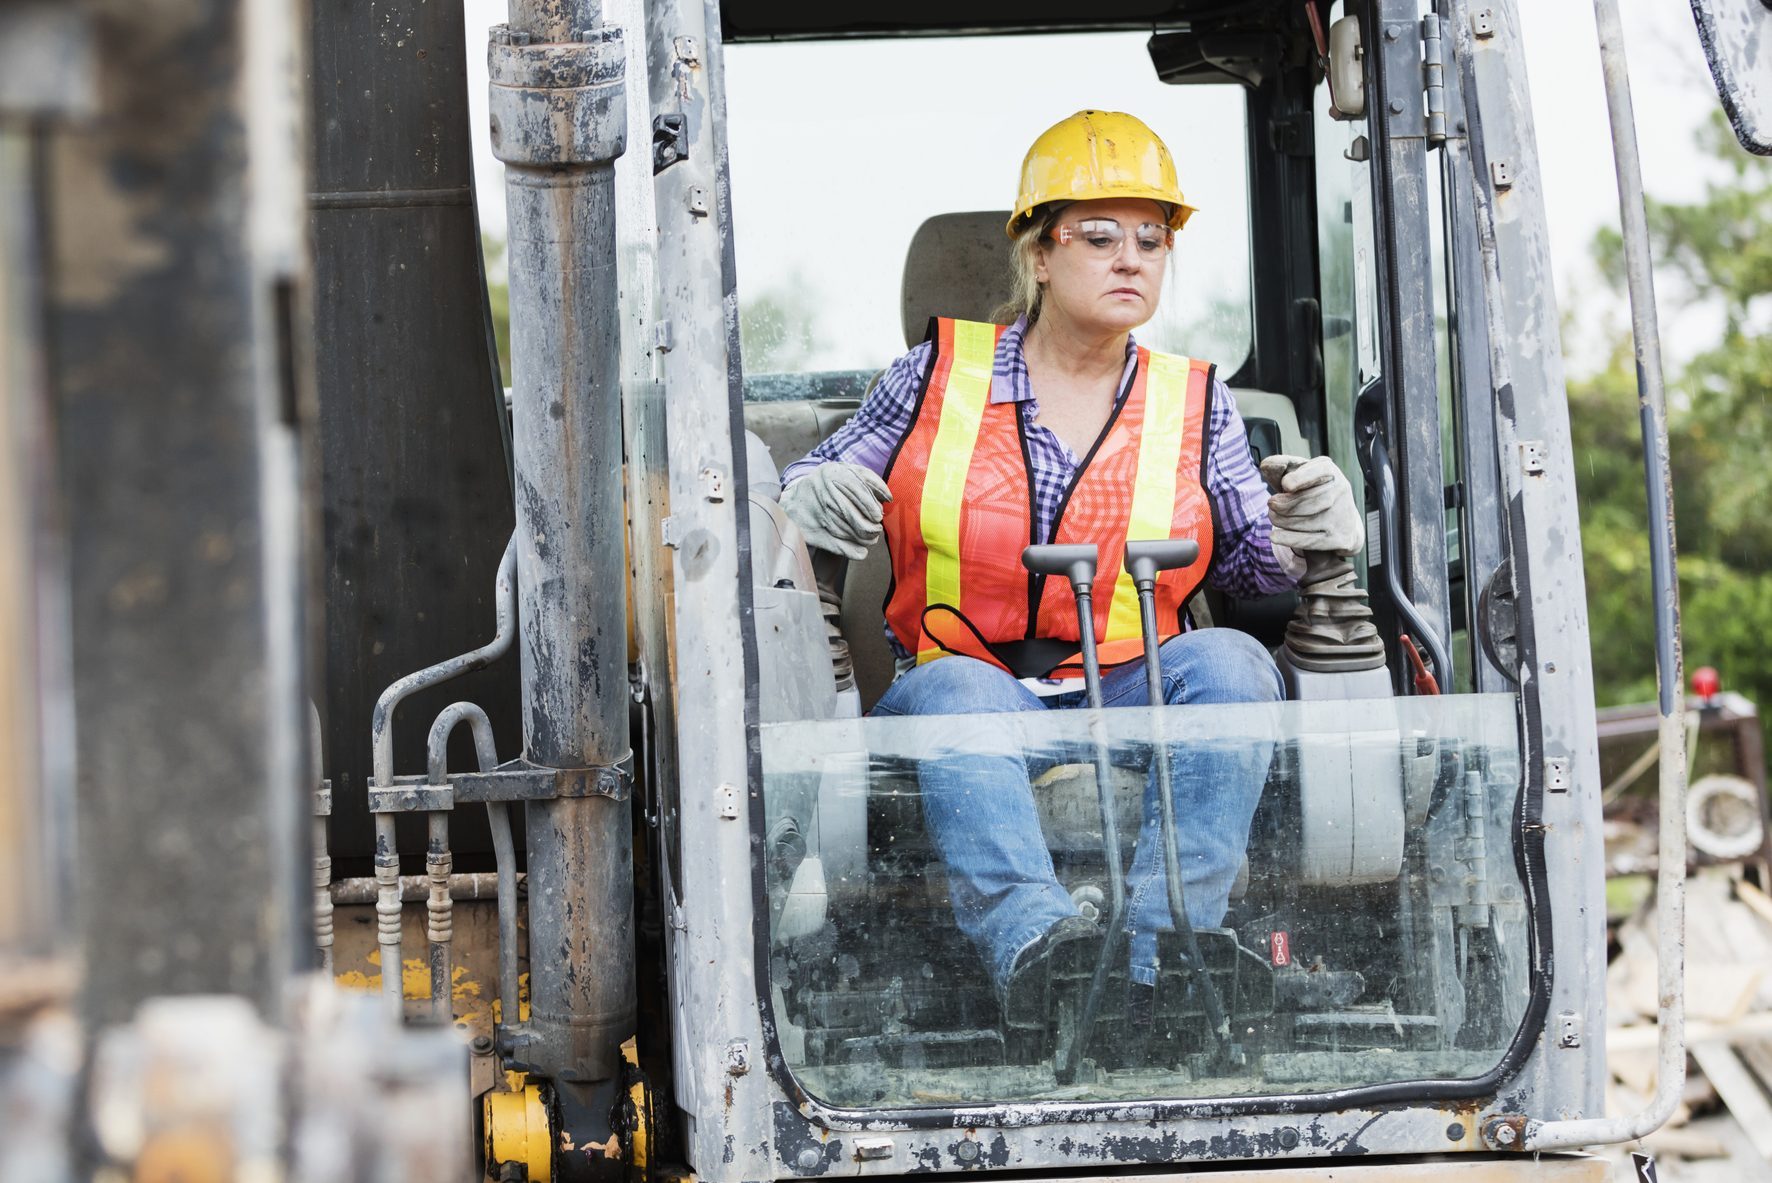 A mature Hispanic woman in her 40s working at a construction site, operating an earth mover. She is wearing a hardhat, reflective vest, and safety goggles.